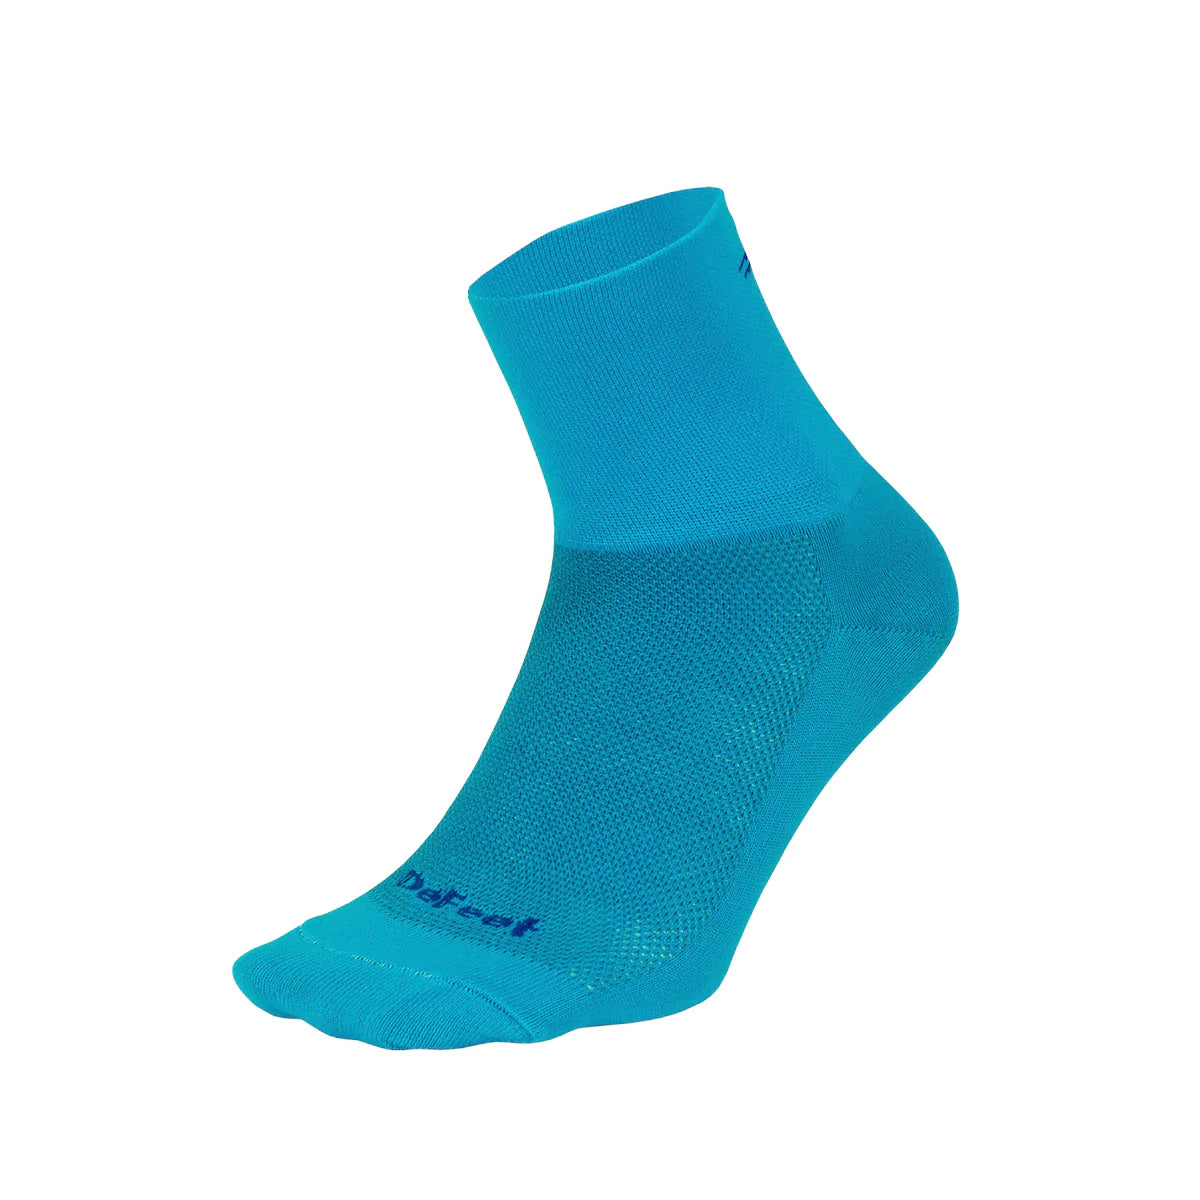 Aireator 3" cuff cycling sock in blue with small tonal blue d-logo on back of cuff